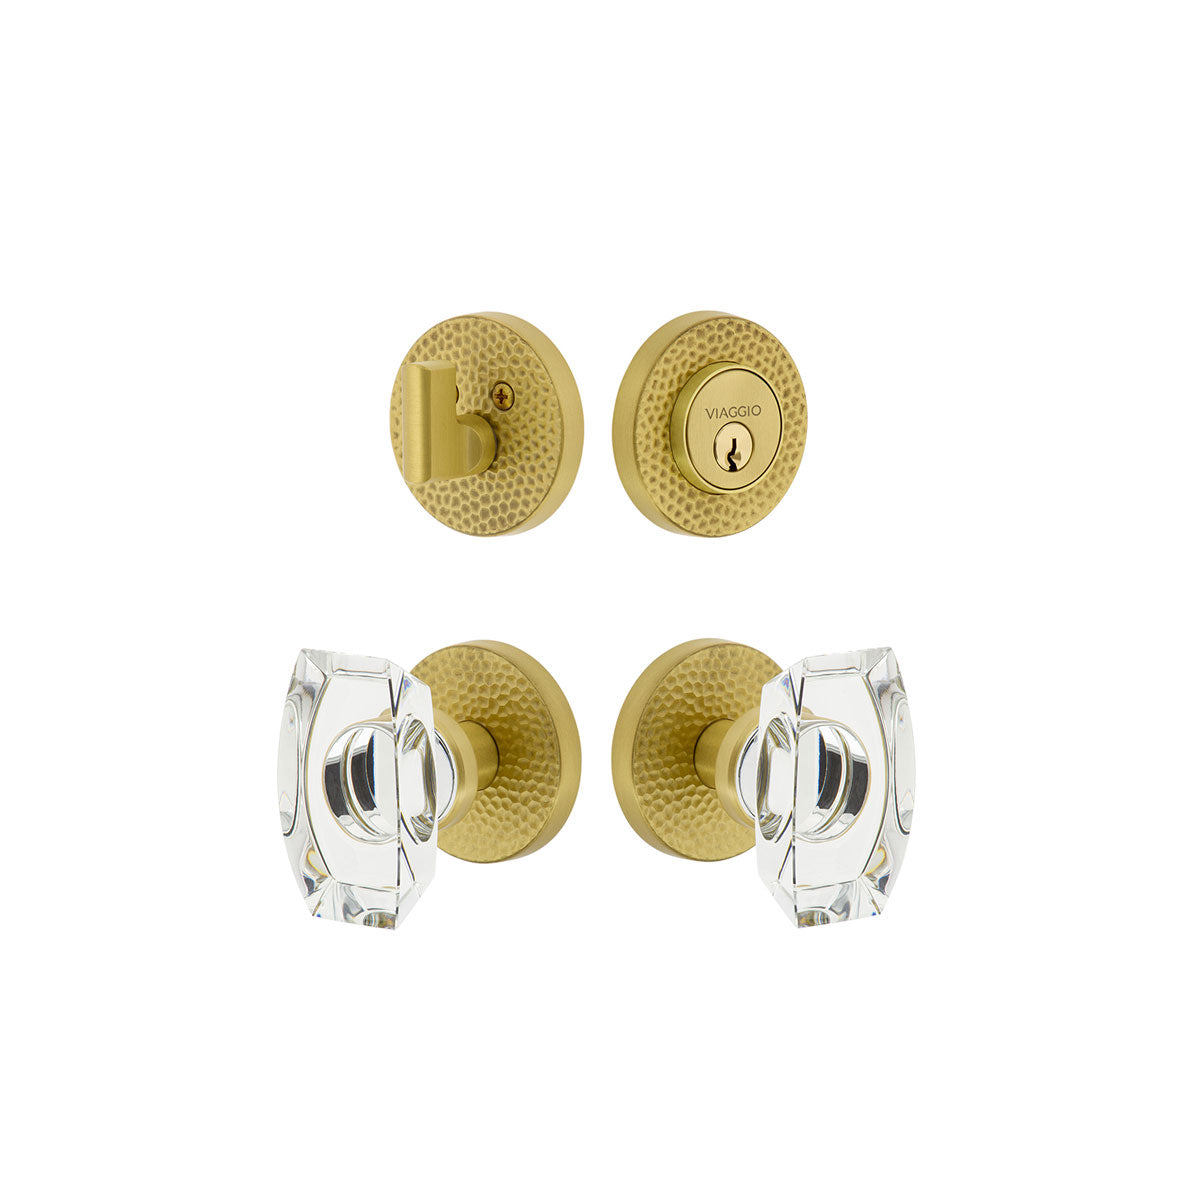 Circolo Hammered Rosette Entry Set with Stella Knob in Satin Brass